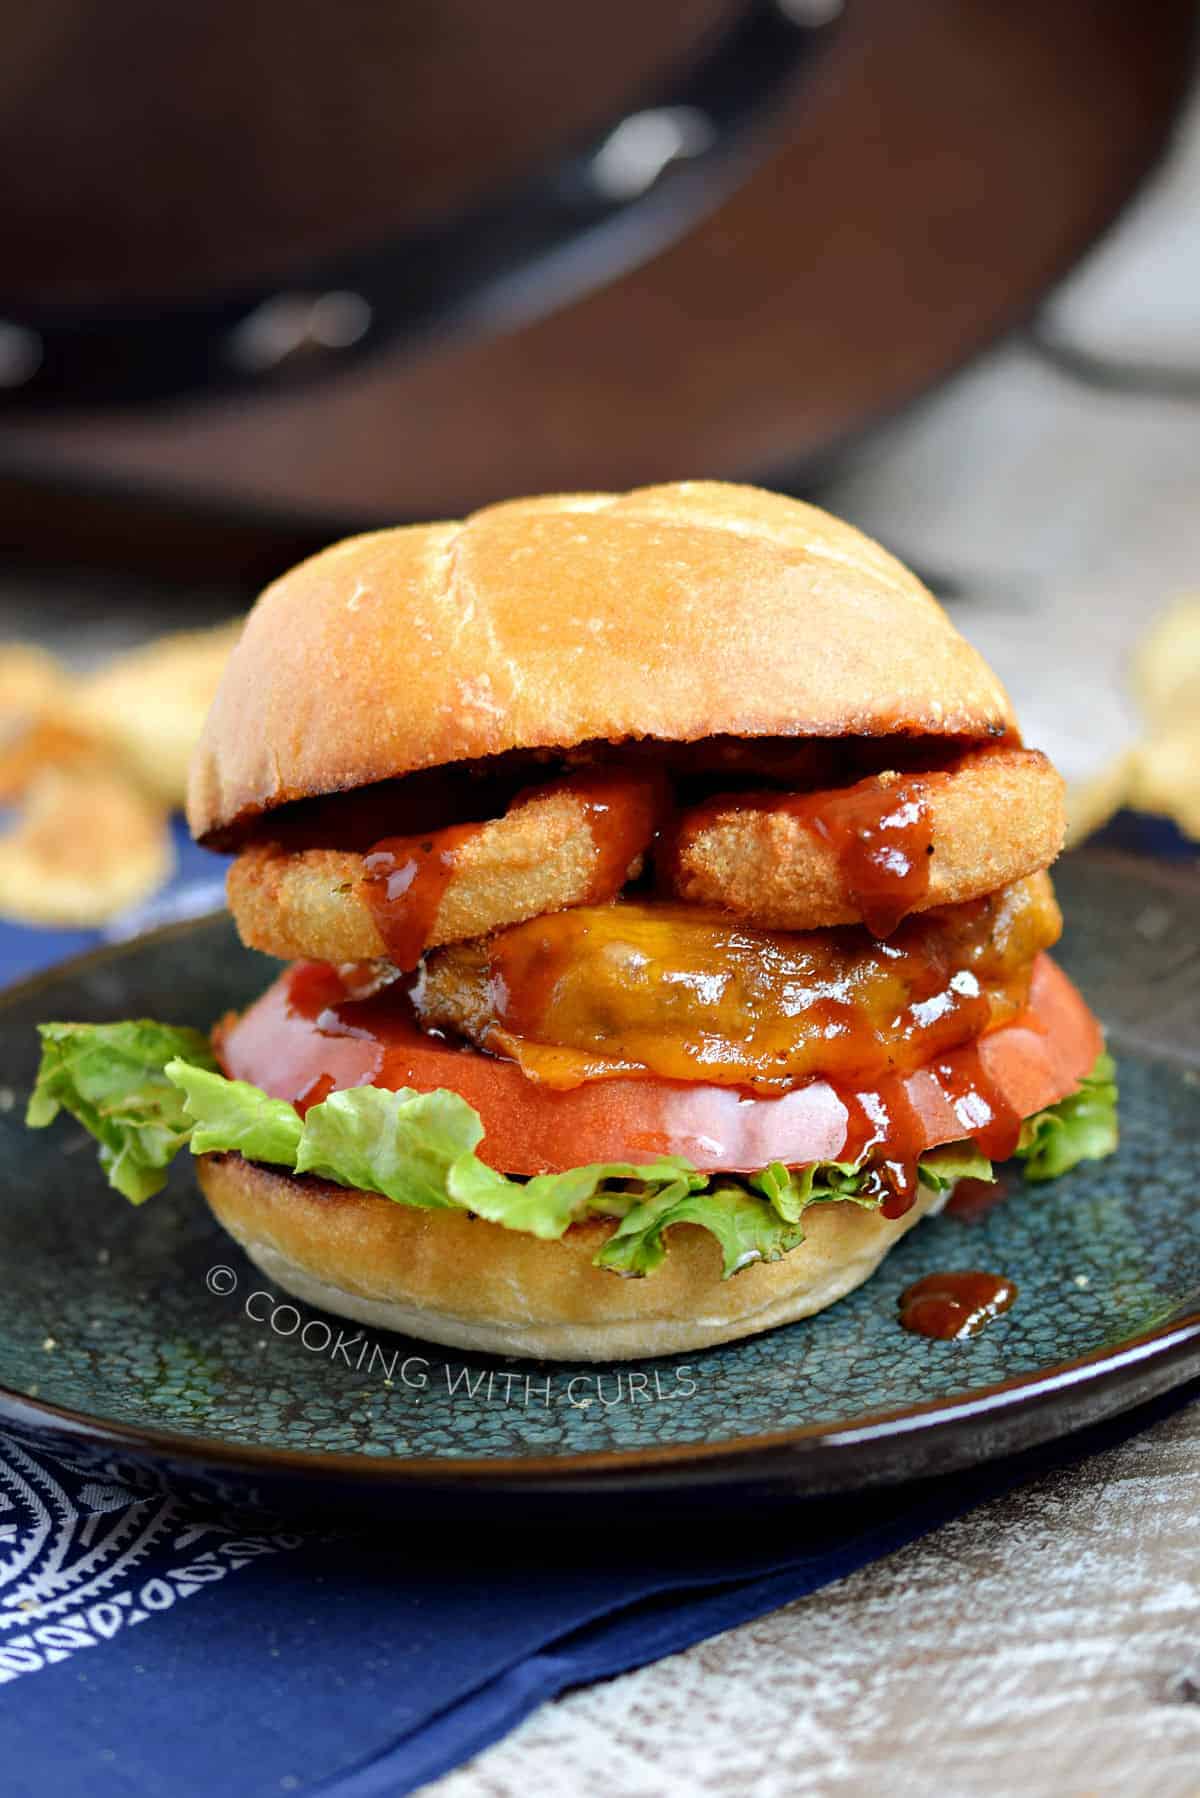 A cheeseburger topped with lettuce, tomato, onion rings, barbecue sauce and a toasted bun.